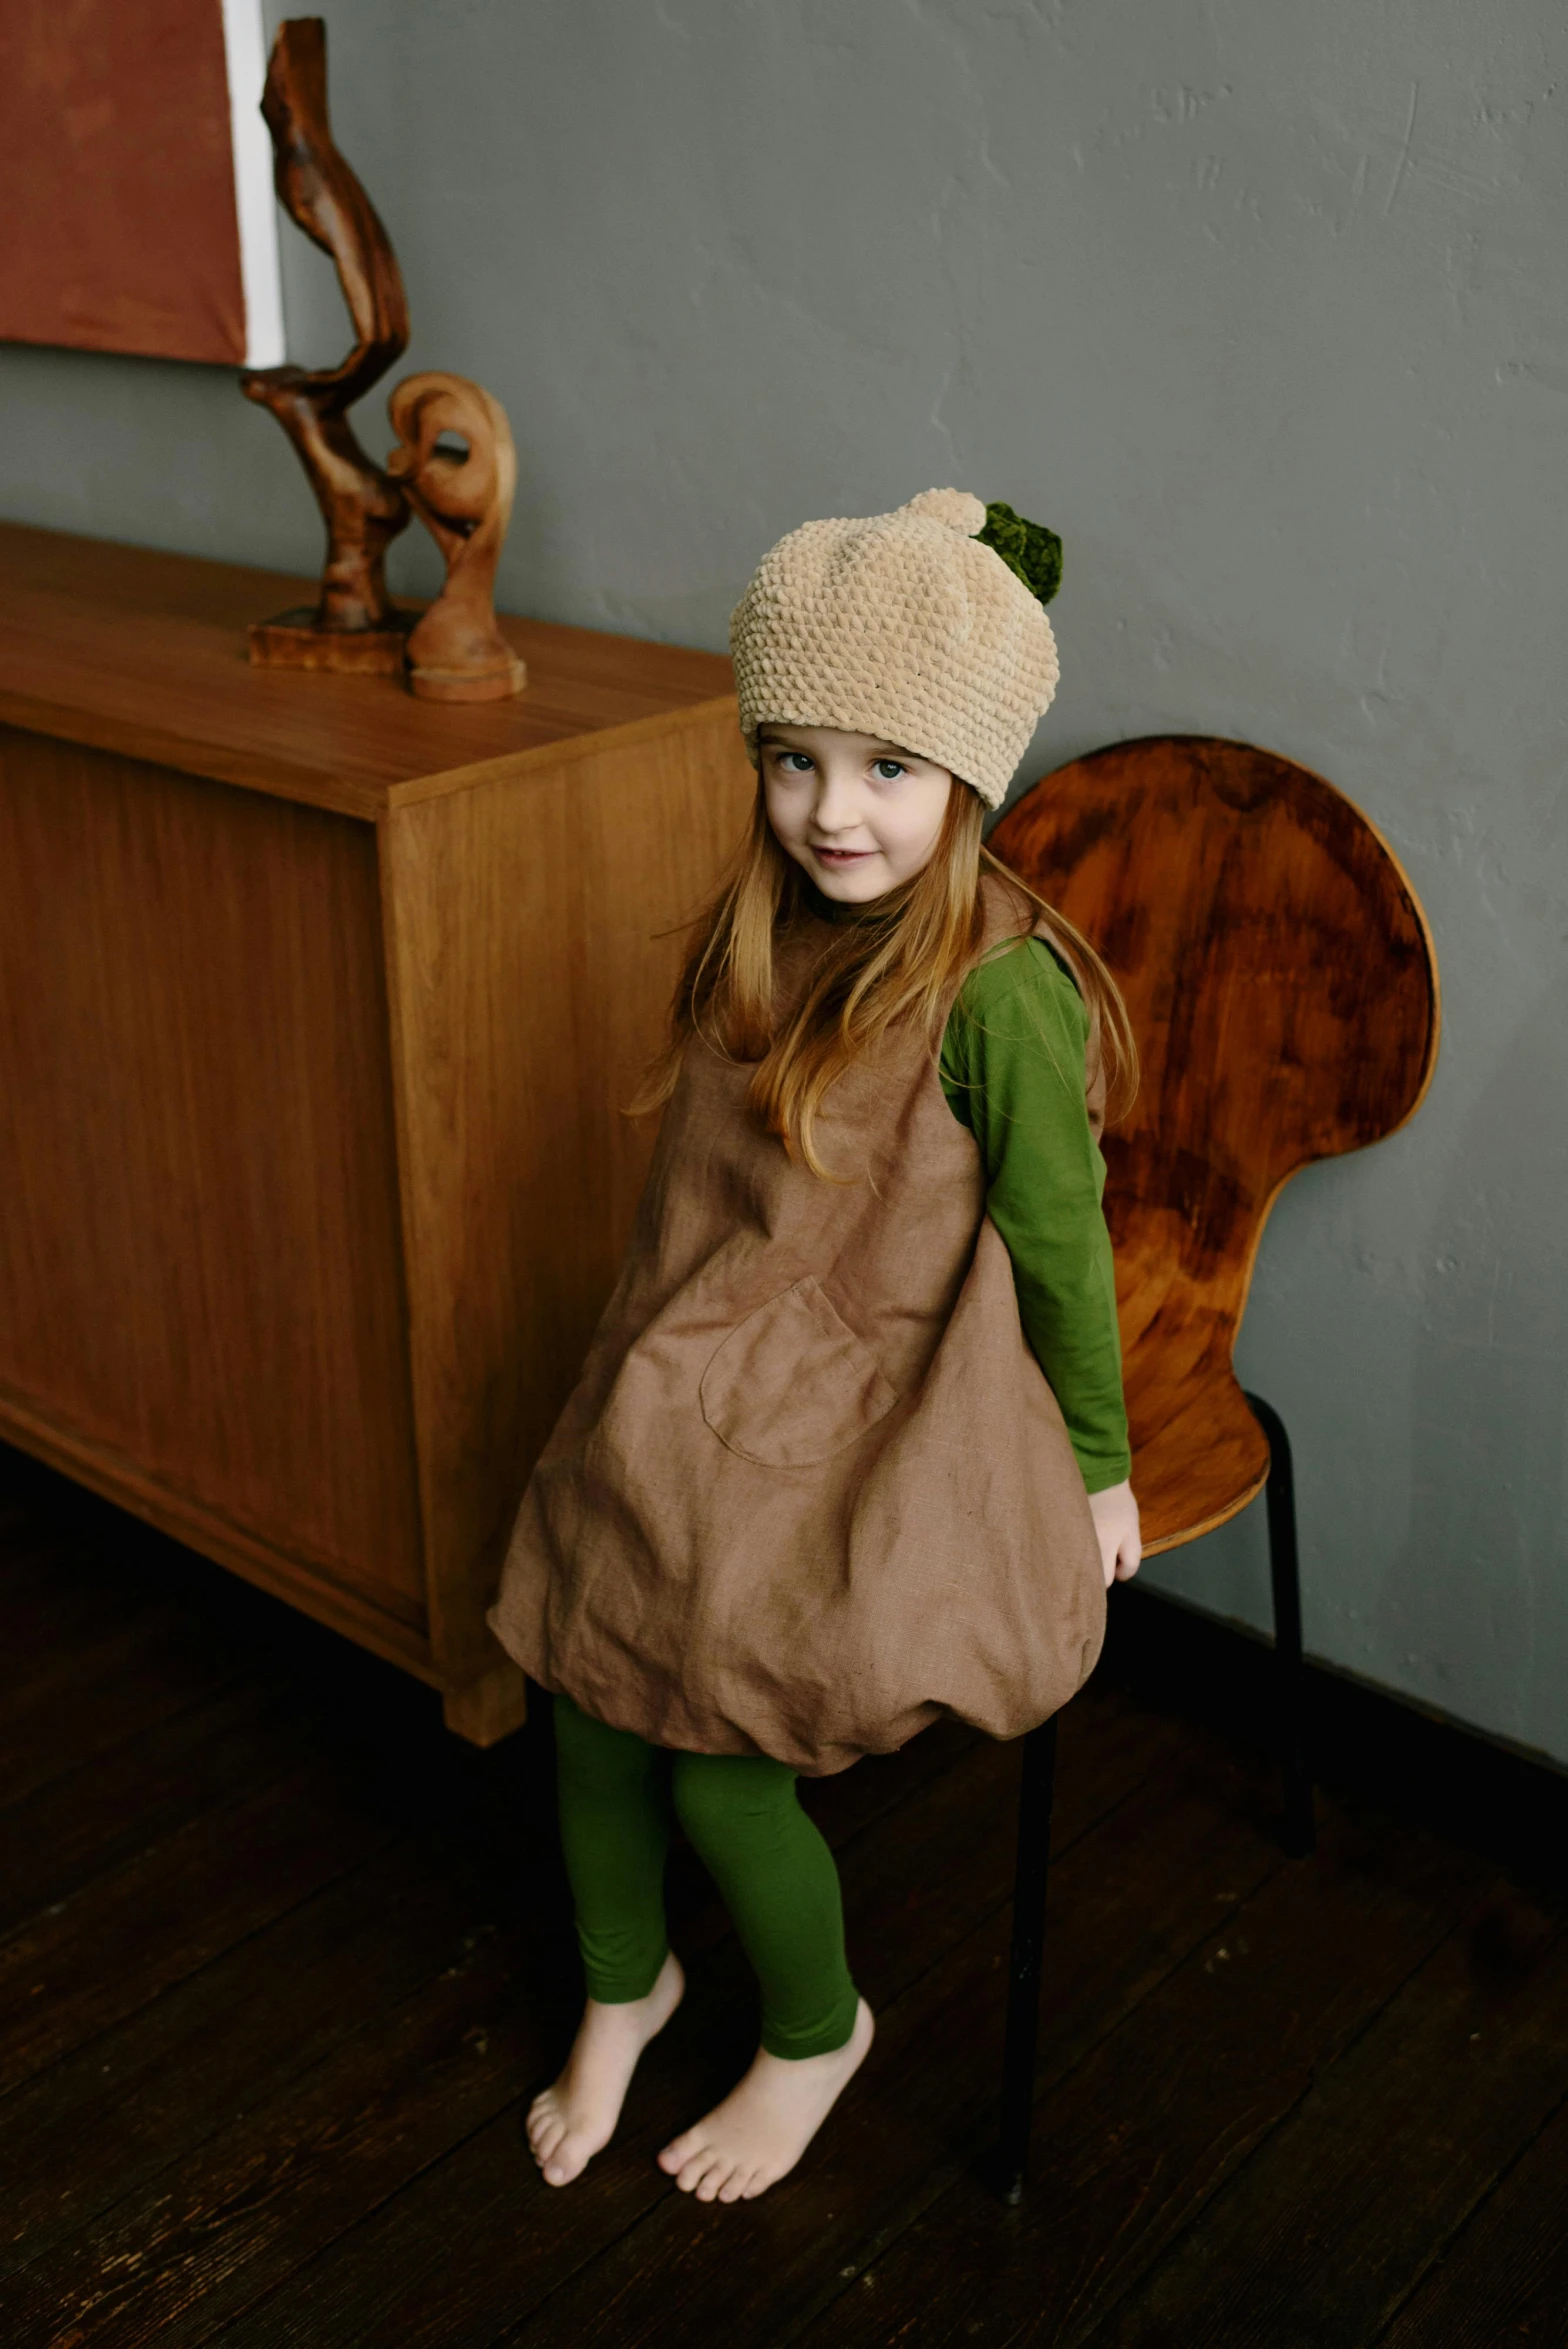 a little girl with a purse on the floor next to a dresser